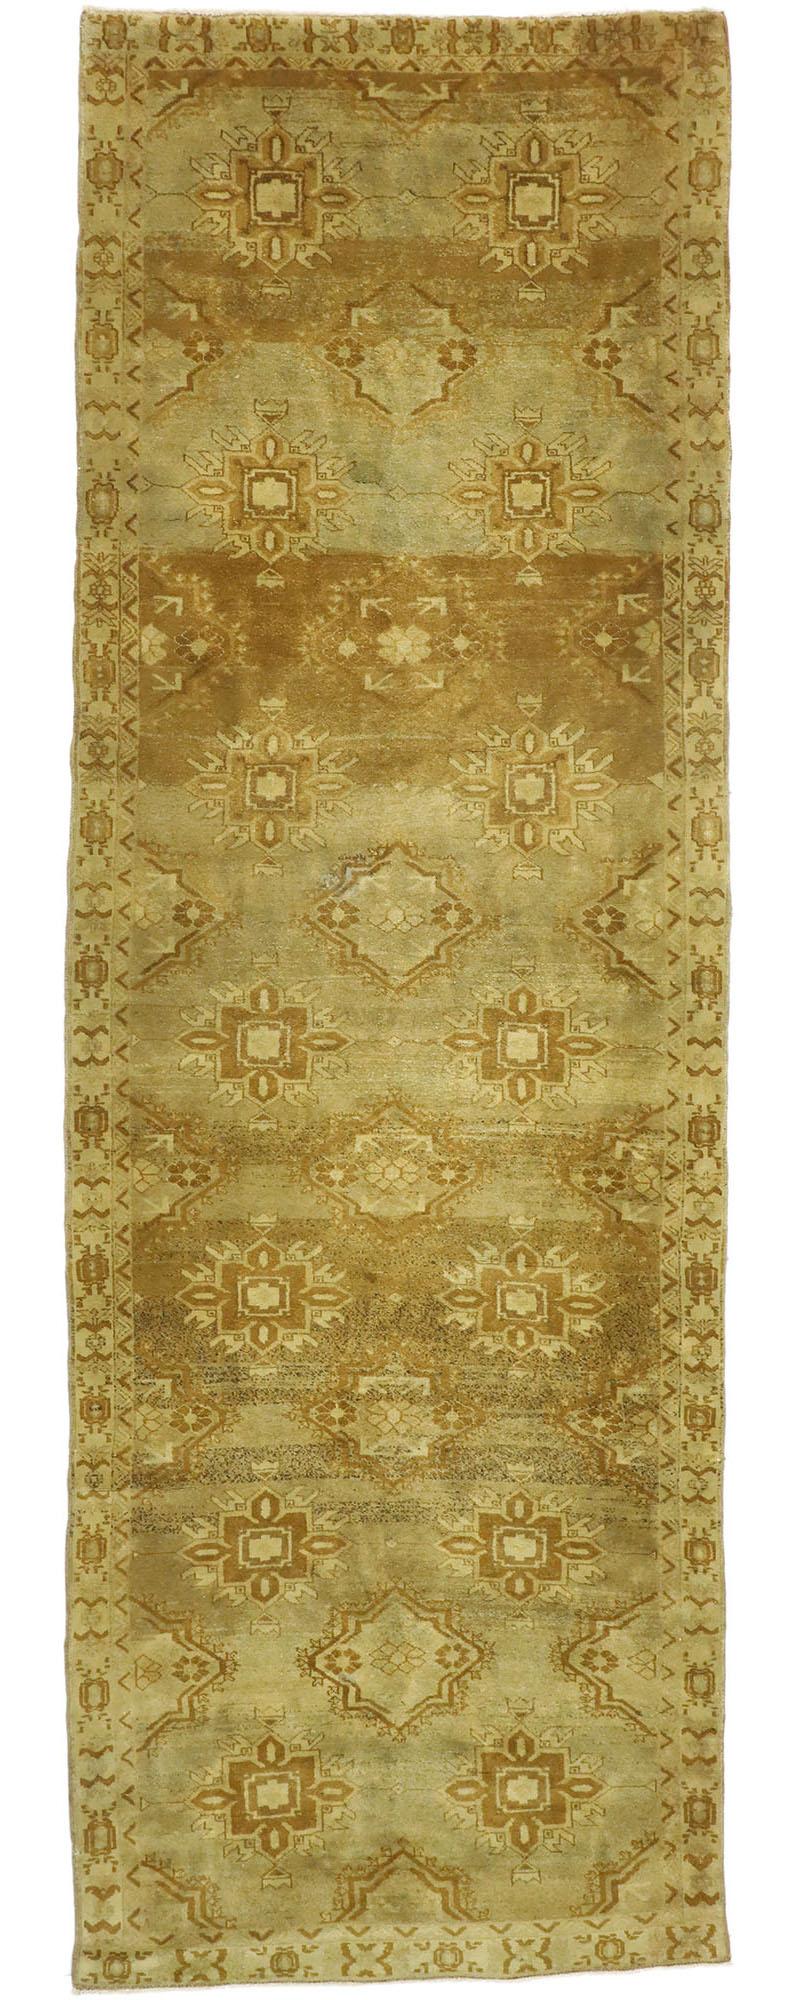 50024 Vintage Turkish Oushak Runner with Modern Shaker Style 04'04 x 12'06. Representing a stylish union of traditional and sophisticated chic, this hand-knotted wool vintage Turkish Oushak runner beautifully embodies modern shaker style in warm